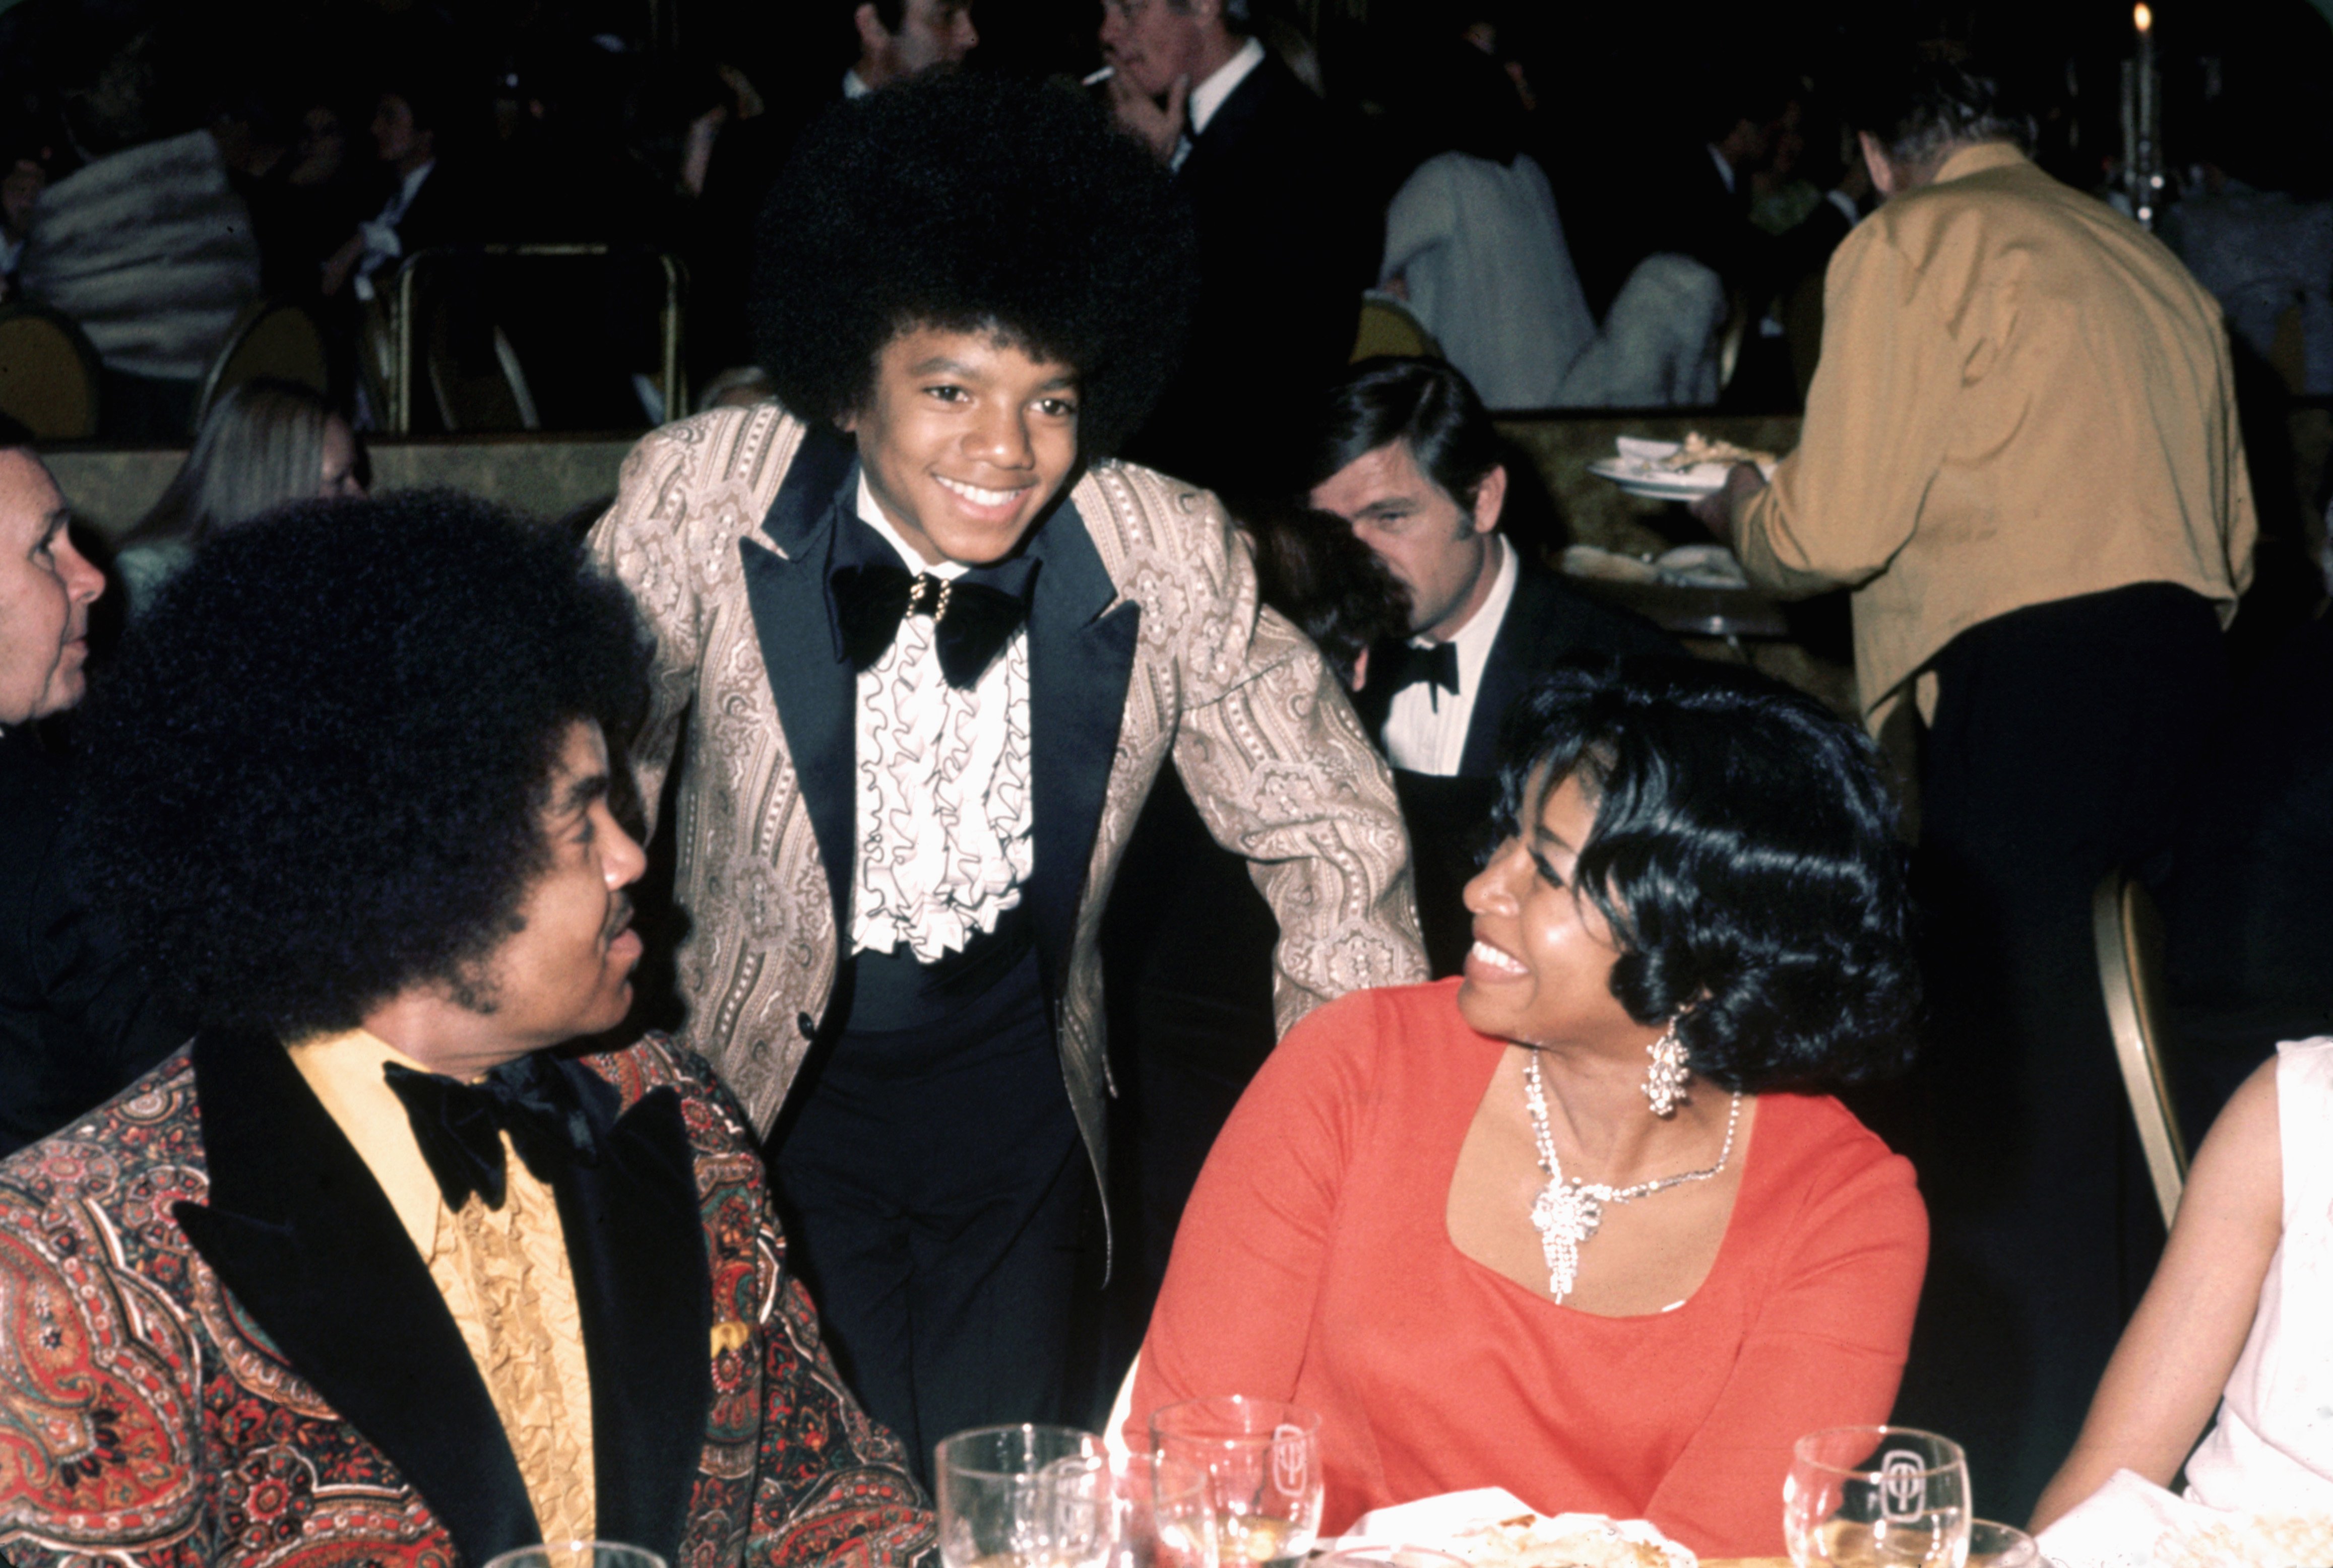 Michael Jackson with his parents, Katherine and Joseph, at the Golden Globes Awards in Los Angeles, in 1973. | Source: Getty Images